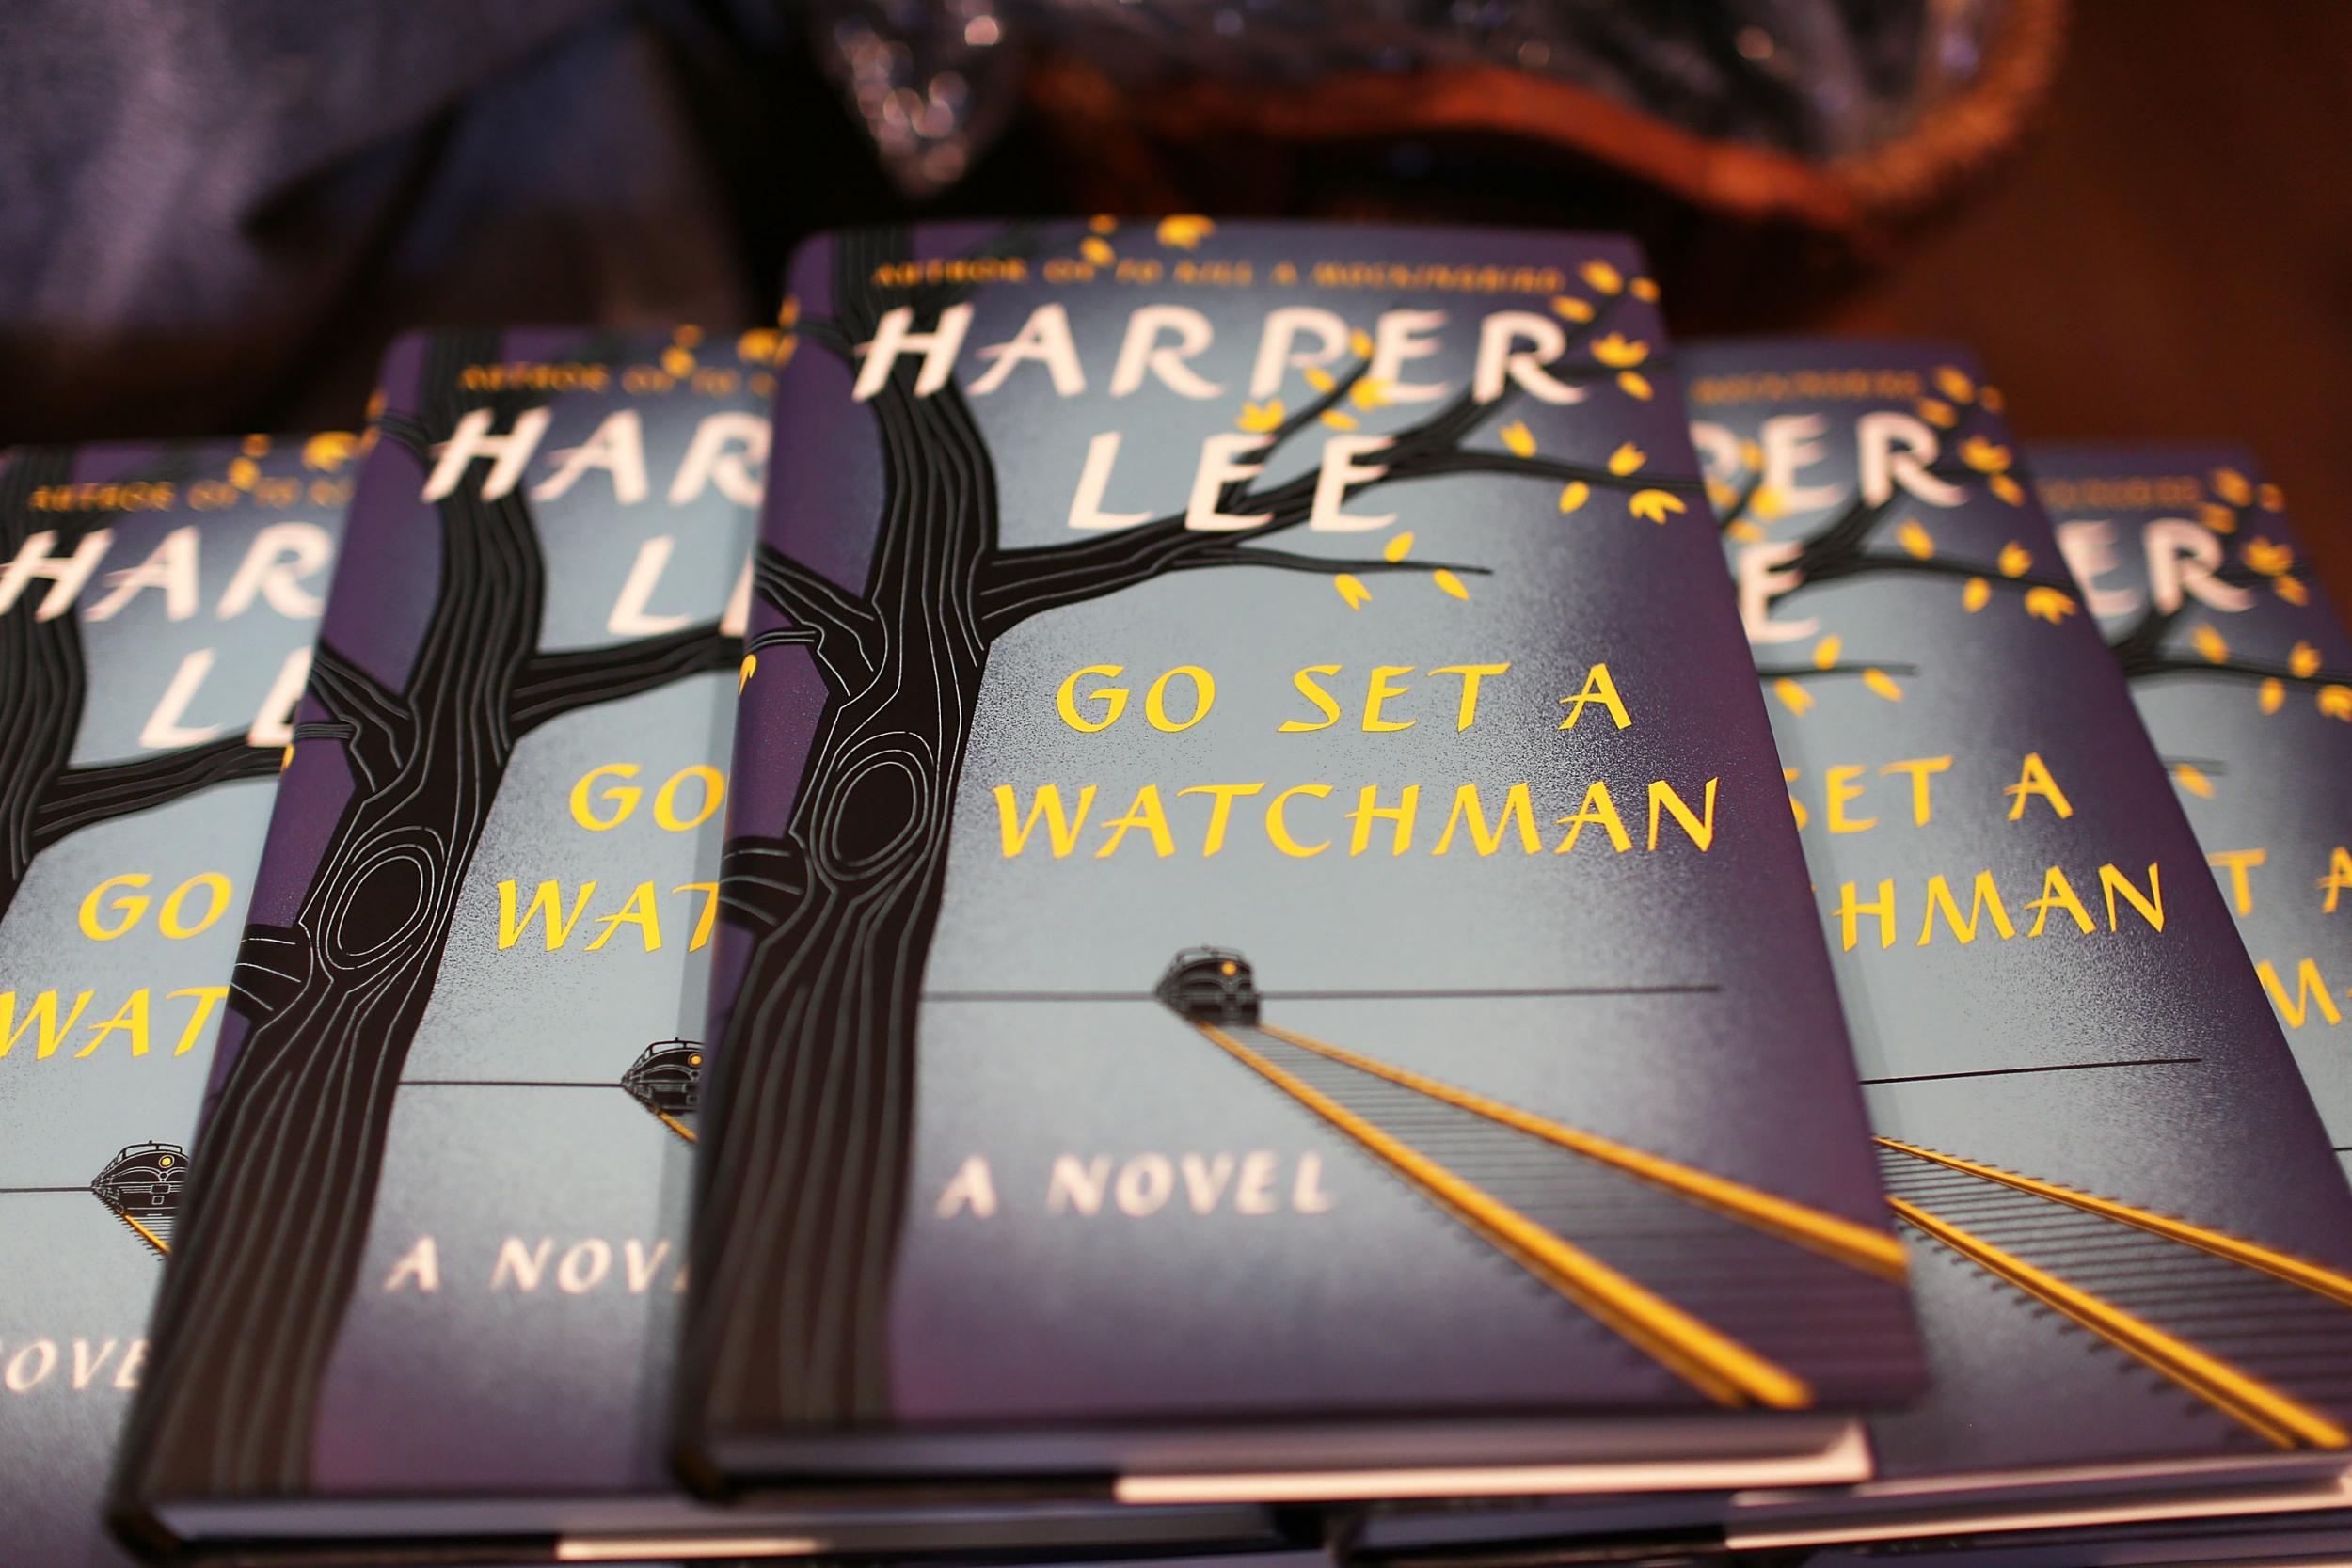 Copies of Go Set A Watchman following its release